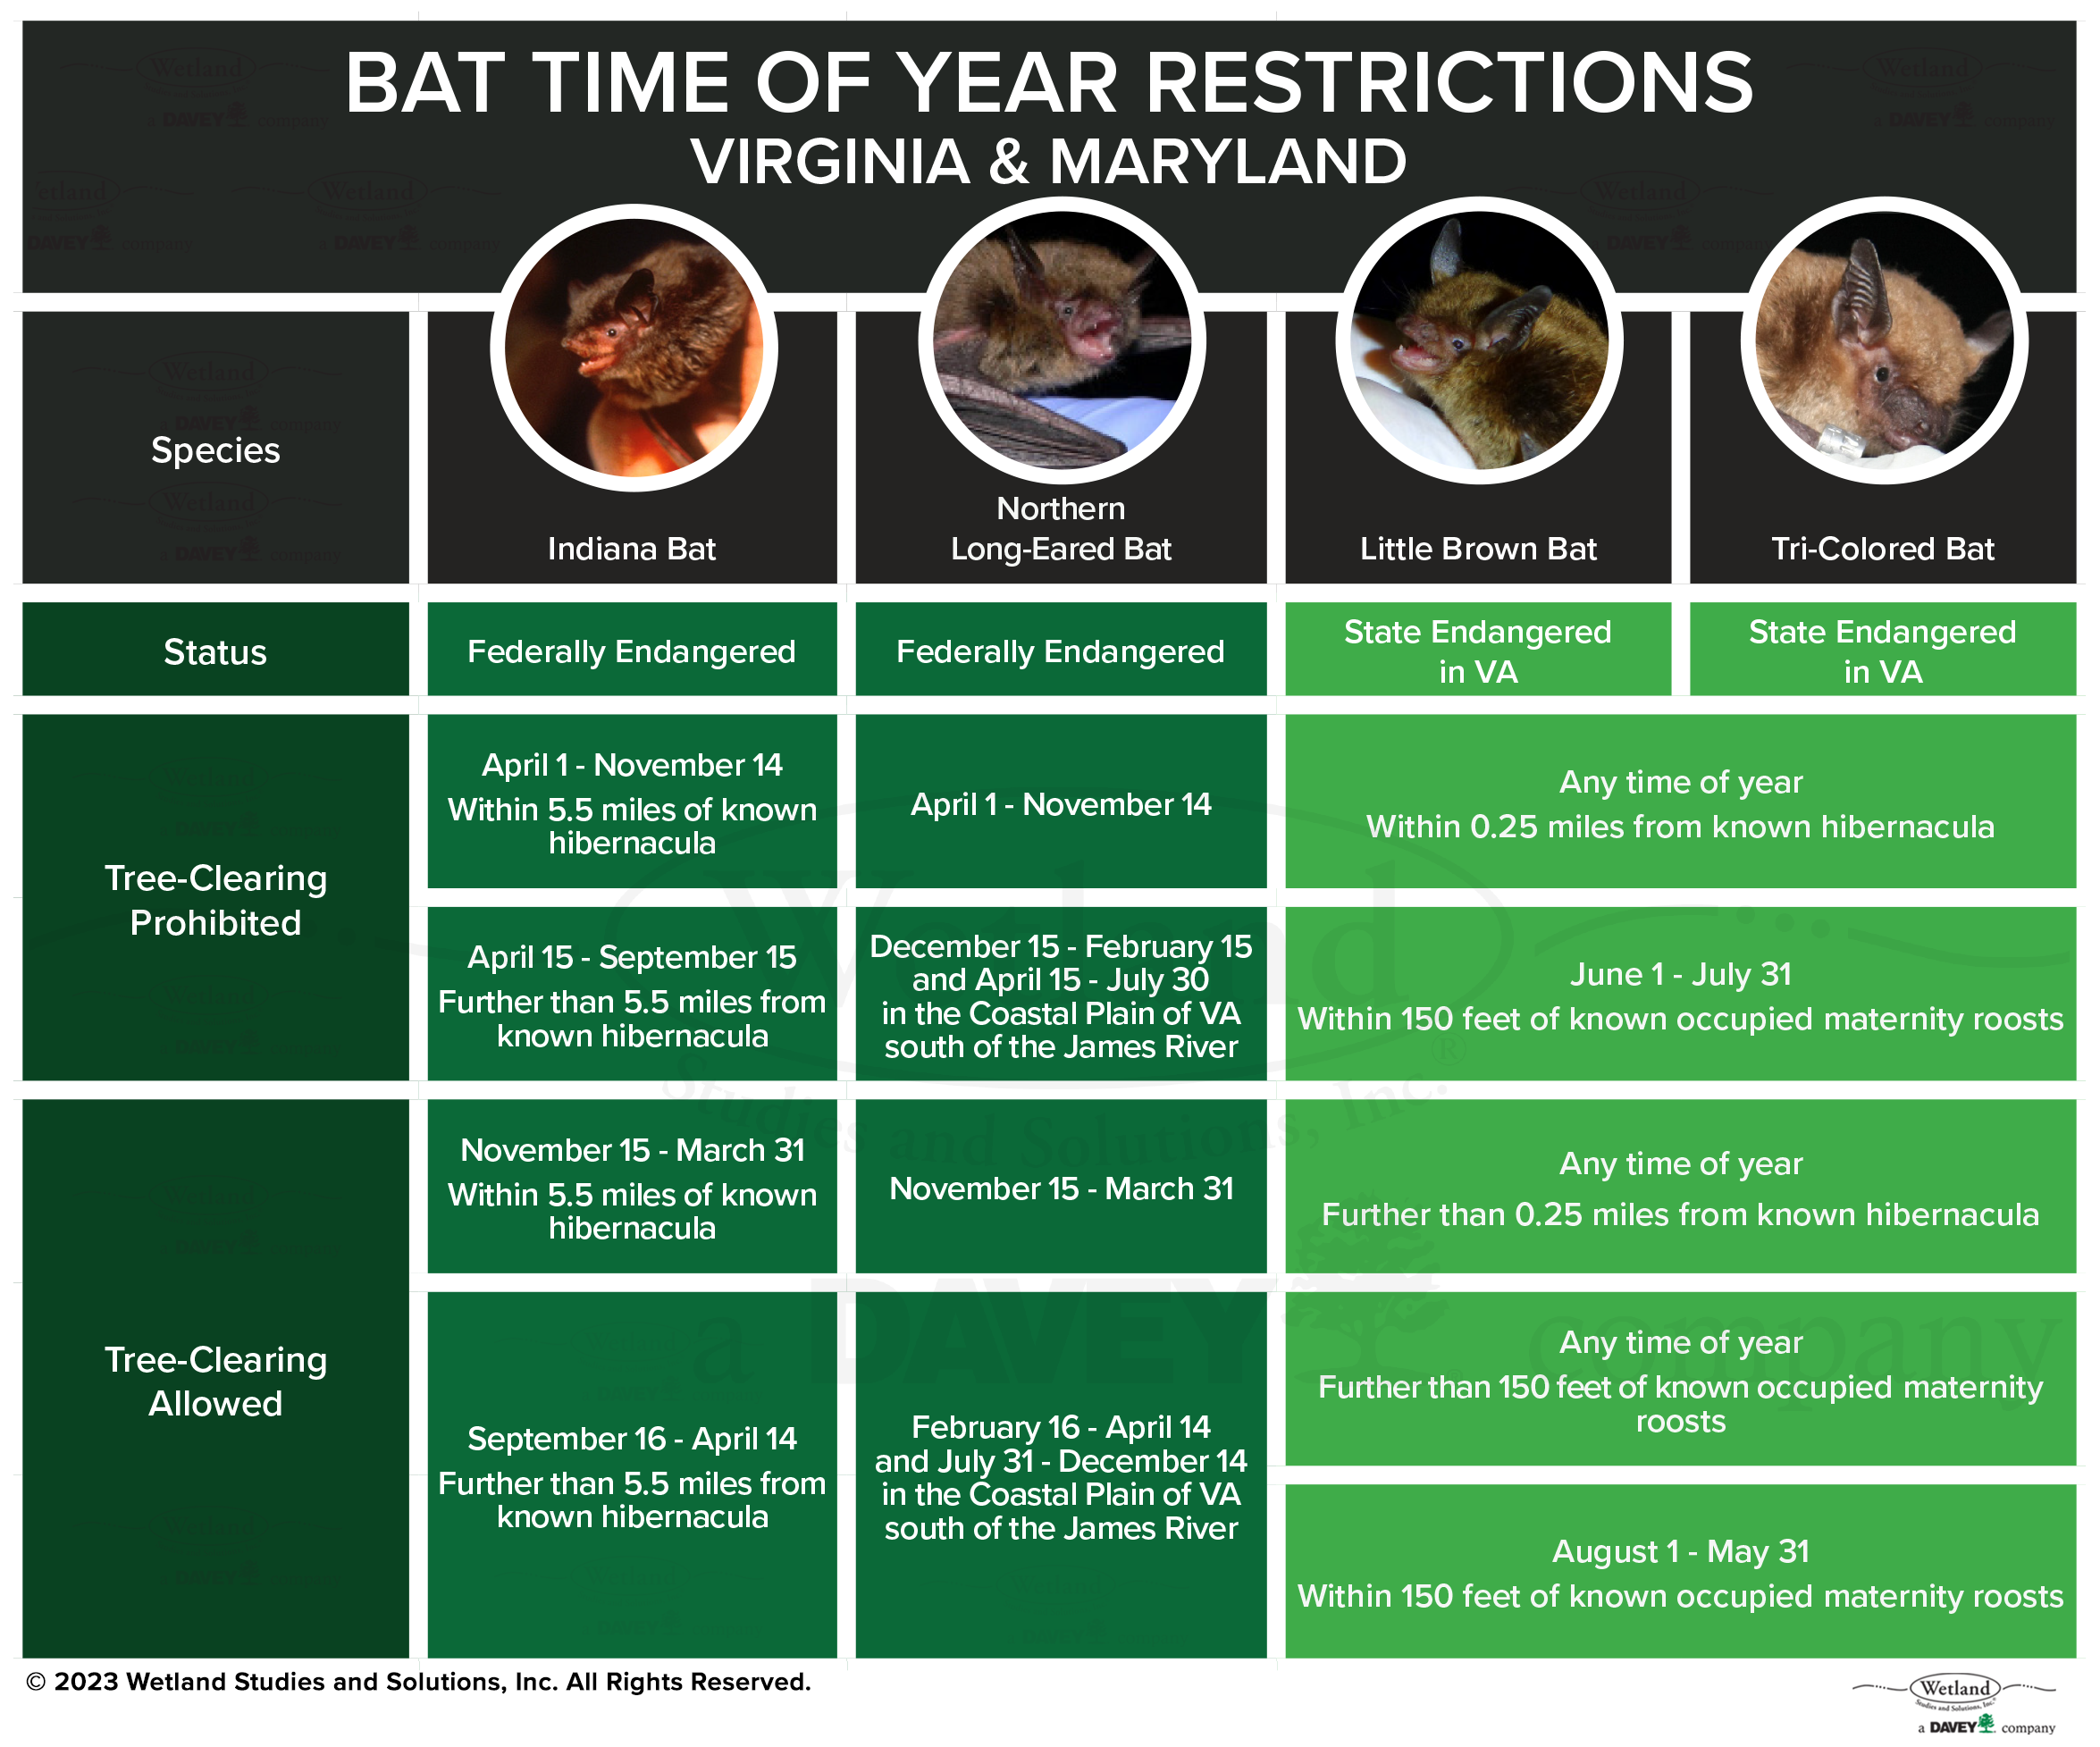 Spring Transitions - Bat Time of Restrictions - WSSI